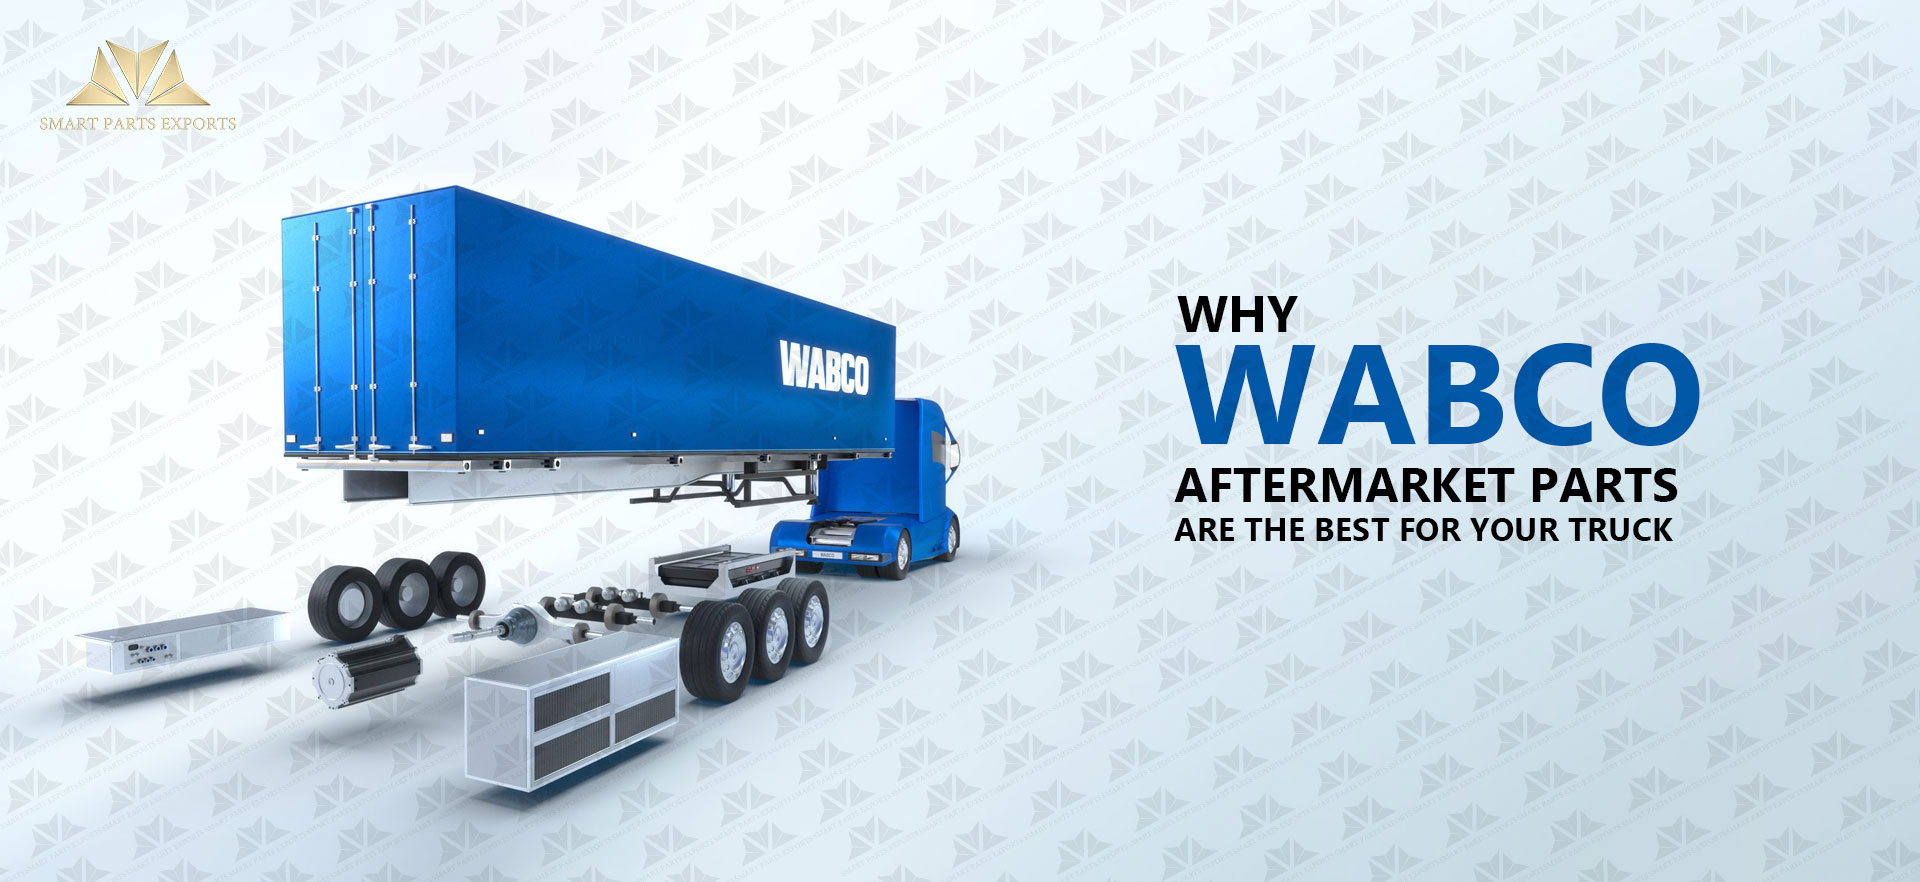 Why Wabco Aftermarket Parts are the Best for Your Truck